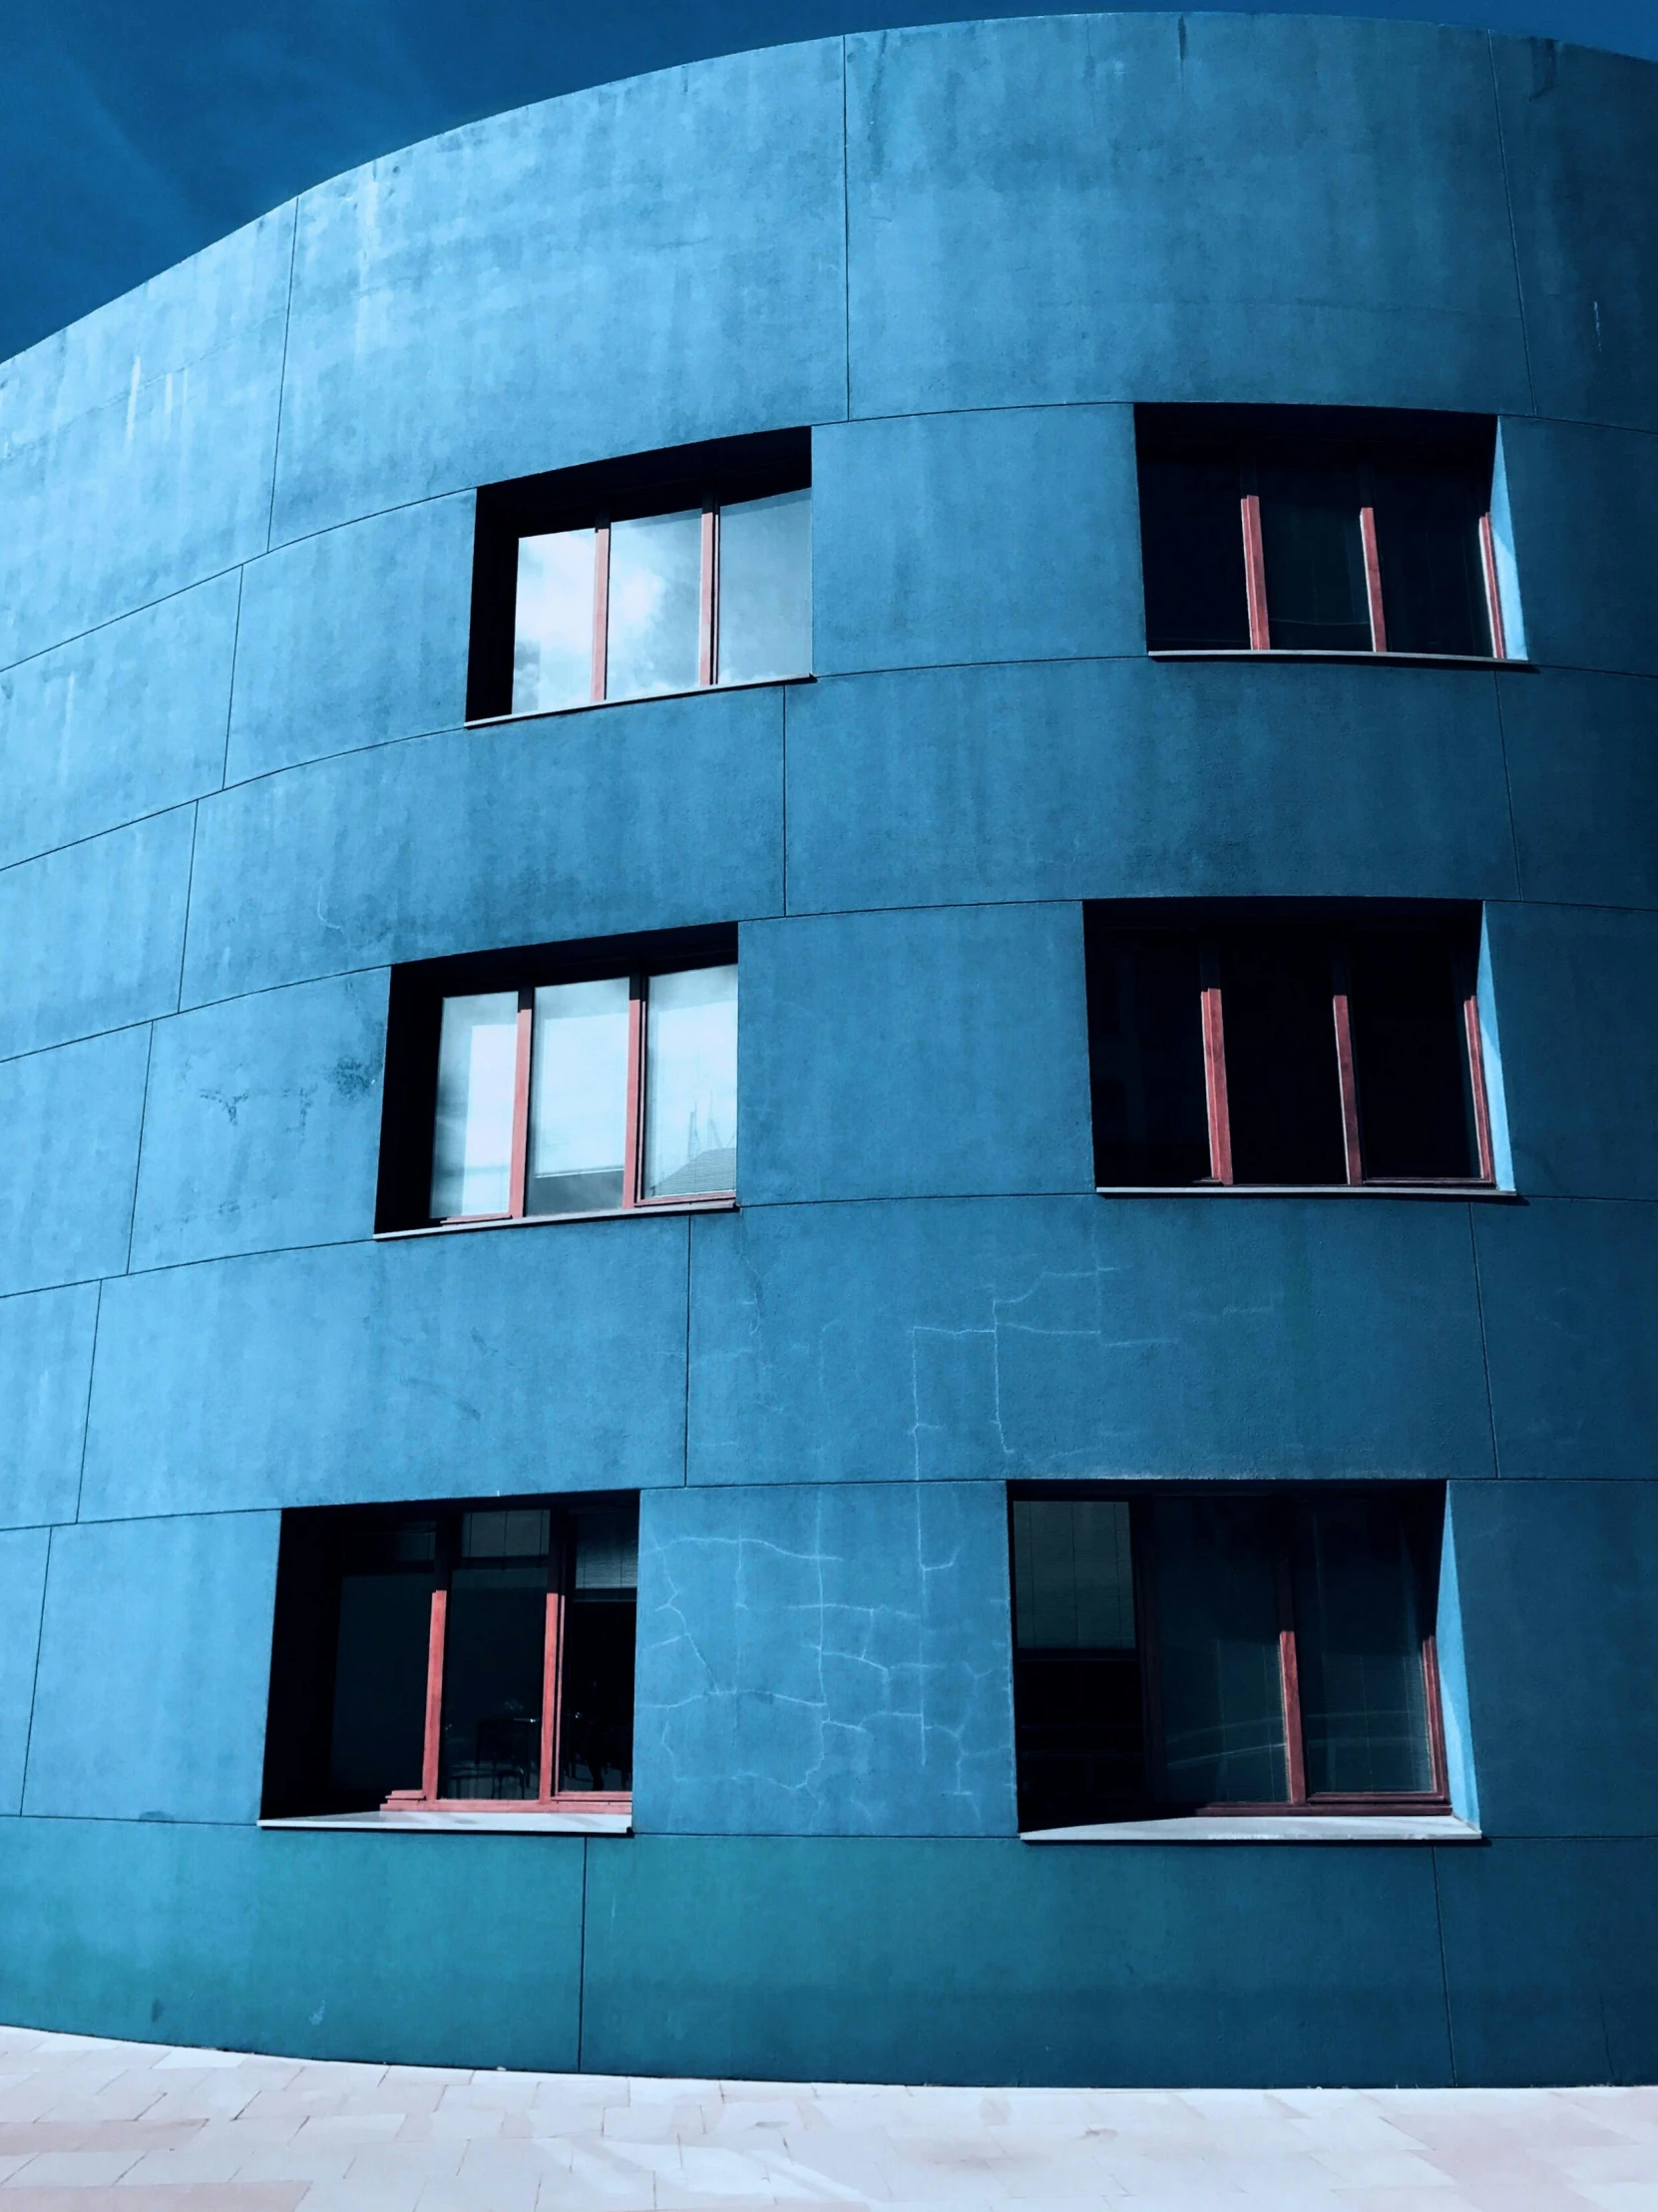 a red fire hydrant sitting in front of a blue building, an album cover, inspired by Tadao Ando, pexels contest winner, modernism, steel window mullions, curvy build, apartment building on the moon, windows and walls :5